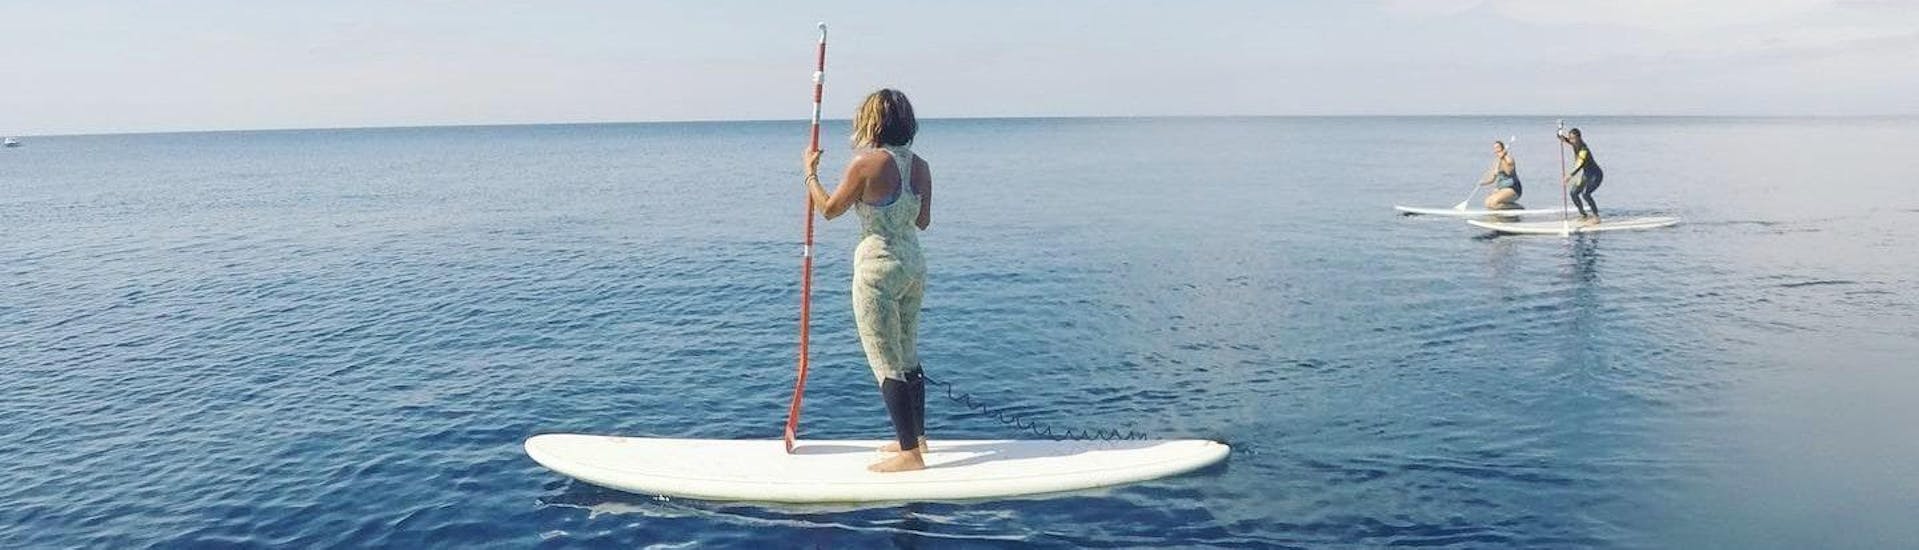 Stand Up Paddleboarding Rental in Puerto del Carmen.